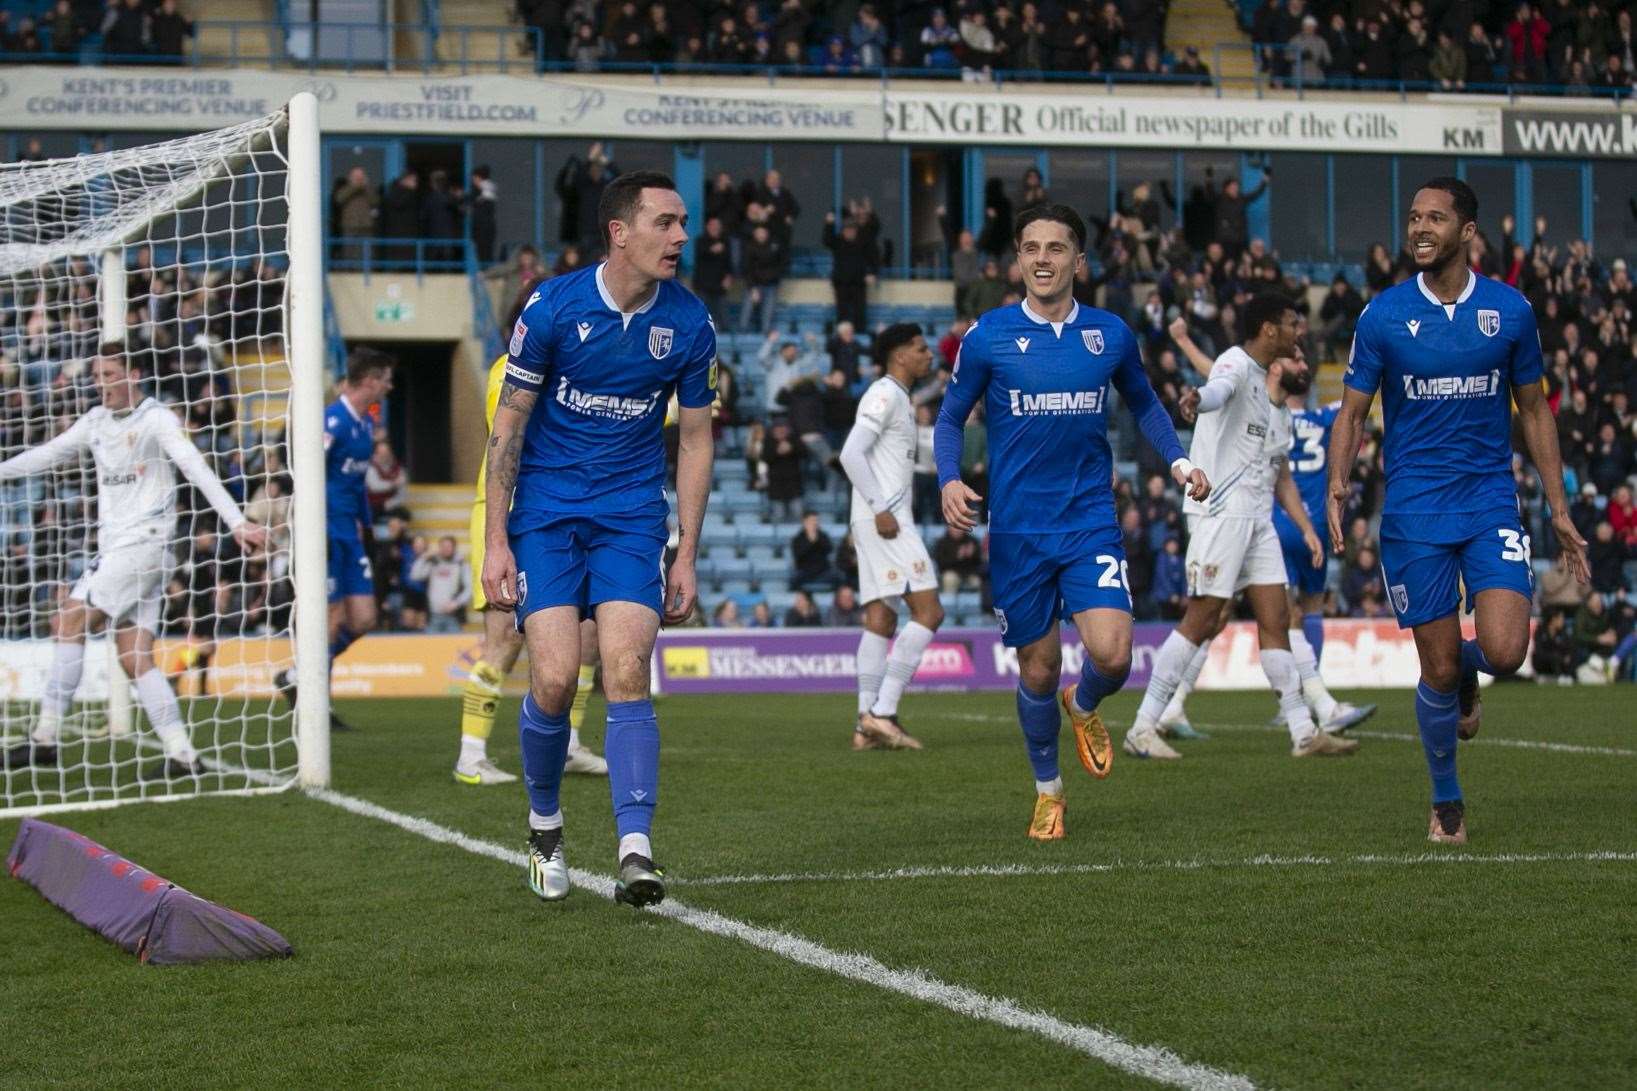 Gillingham celebrate their 32nd minute opener - headed in by Shaun Williams